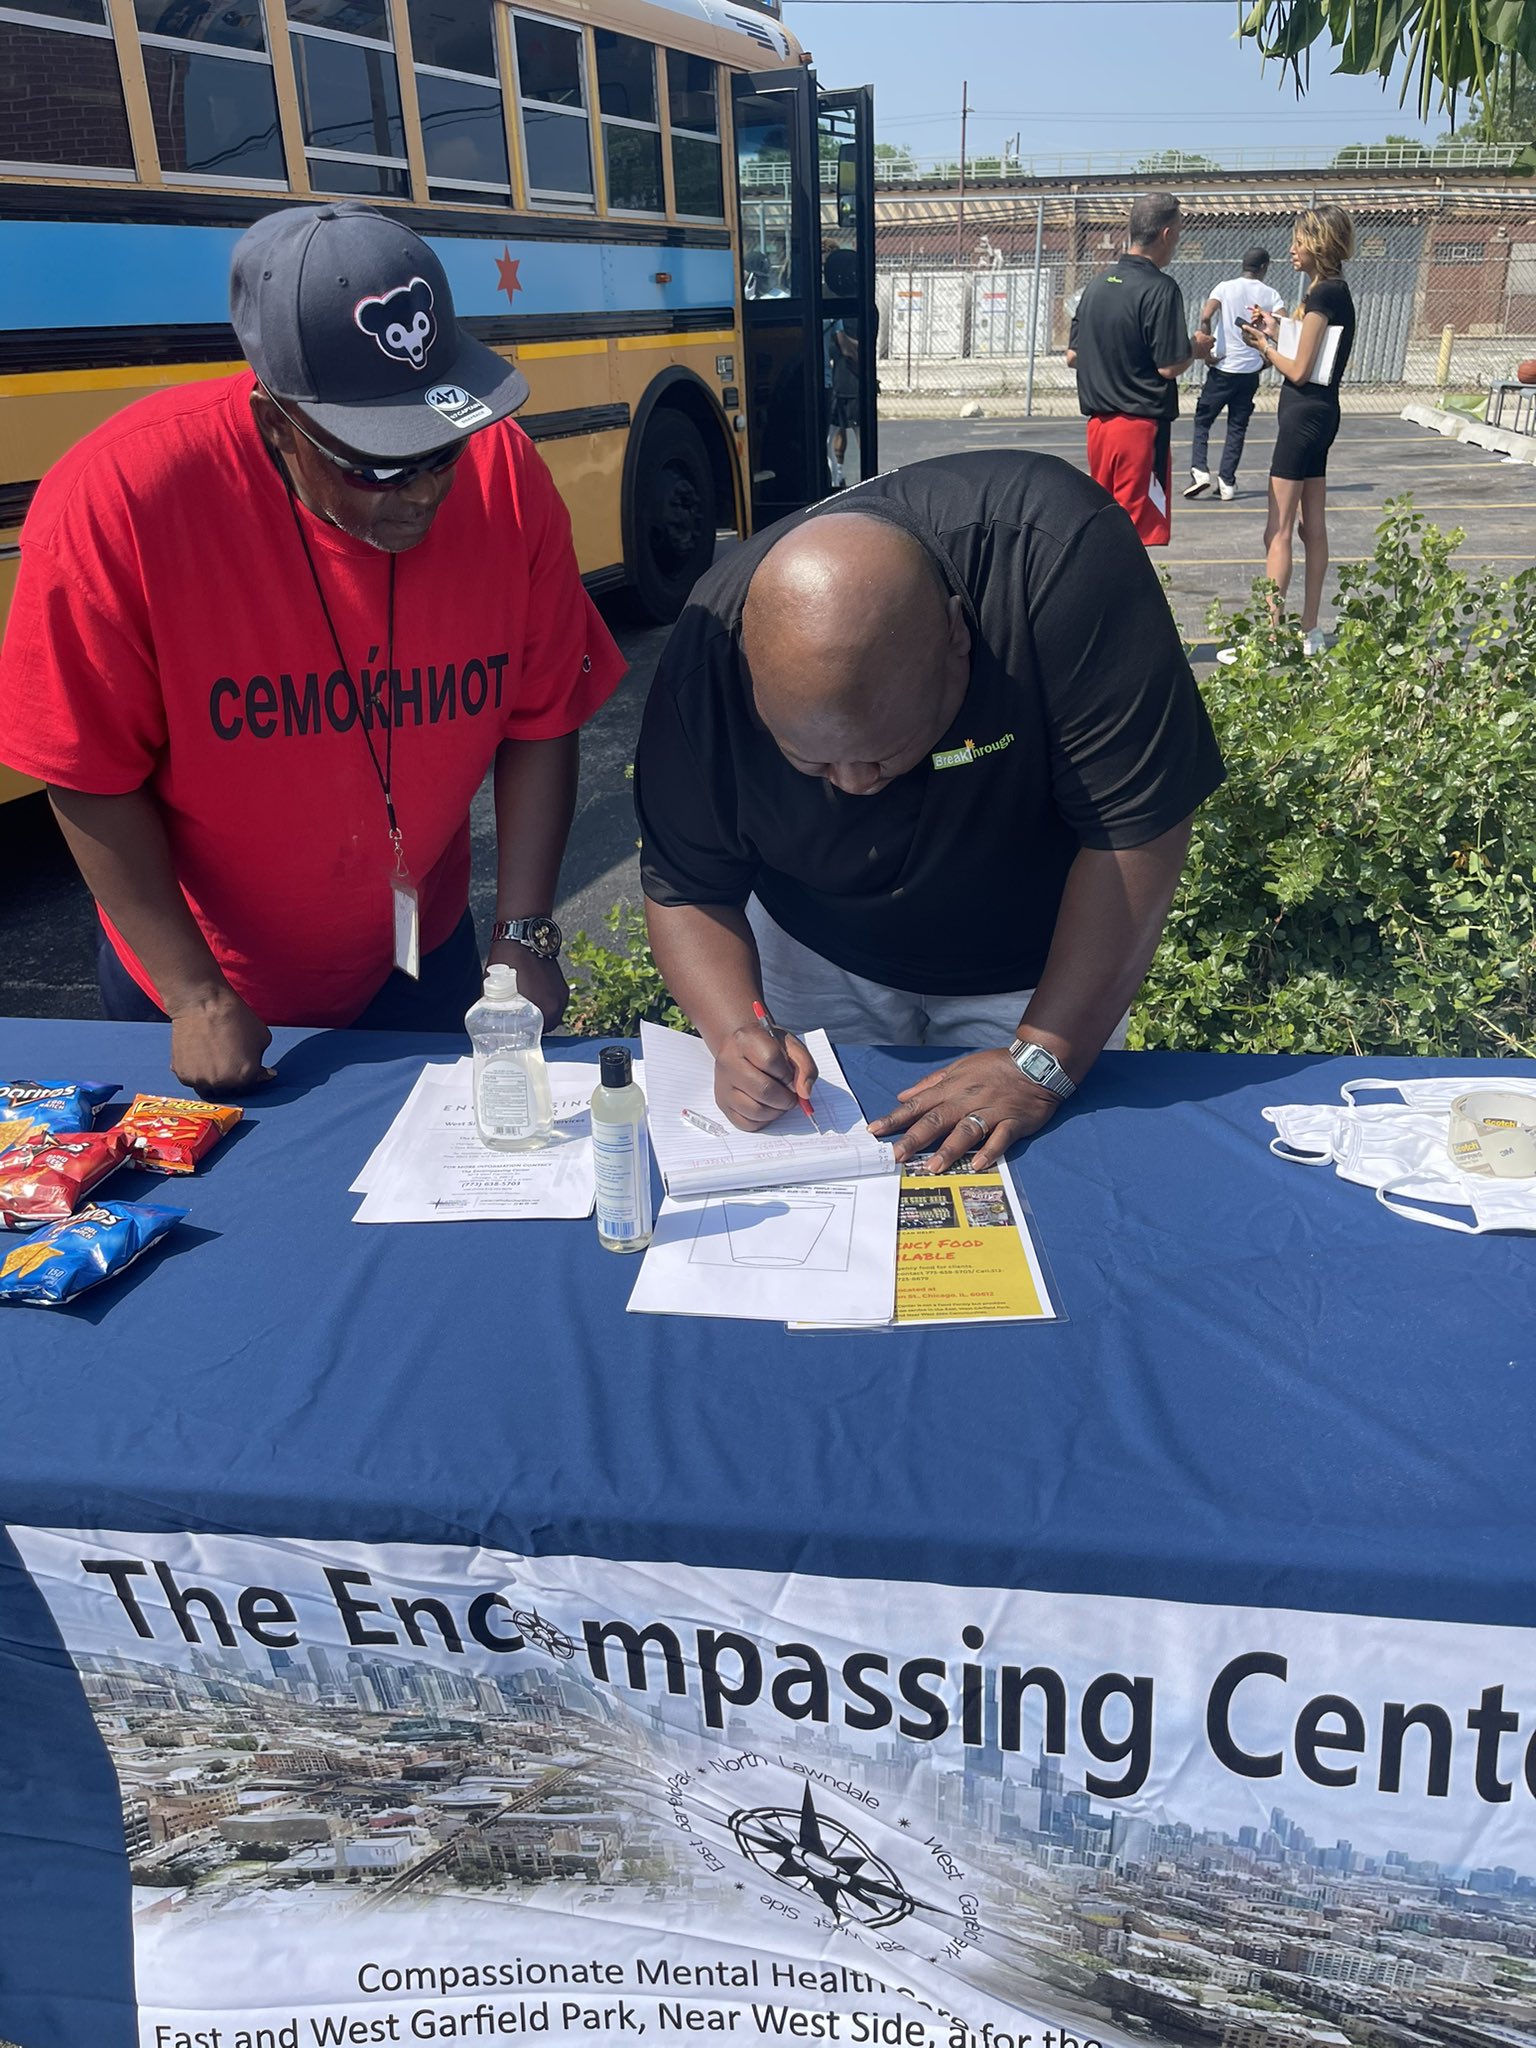 mental health: Over the summer, the Center partnered with Breakthrough Urban Ministries, hosting a table at their East Park Takeover resource fair. Credit: The Encompassing Center